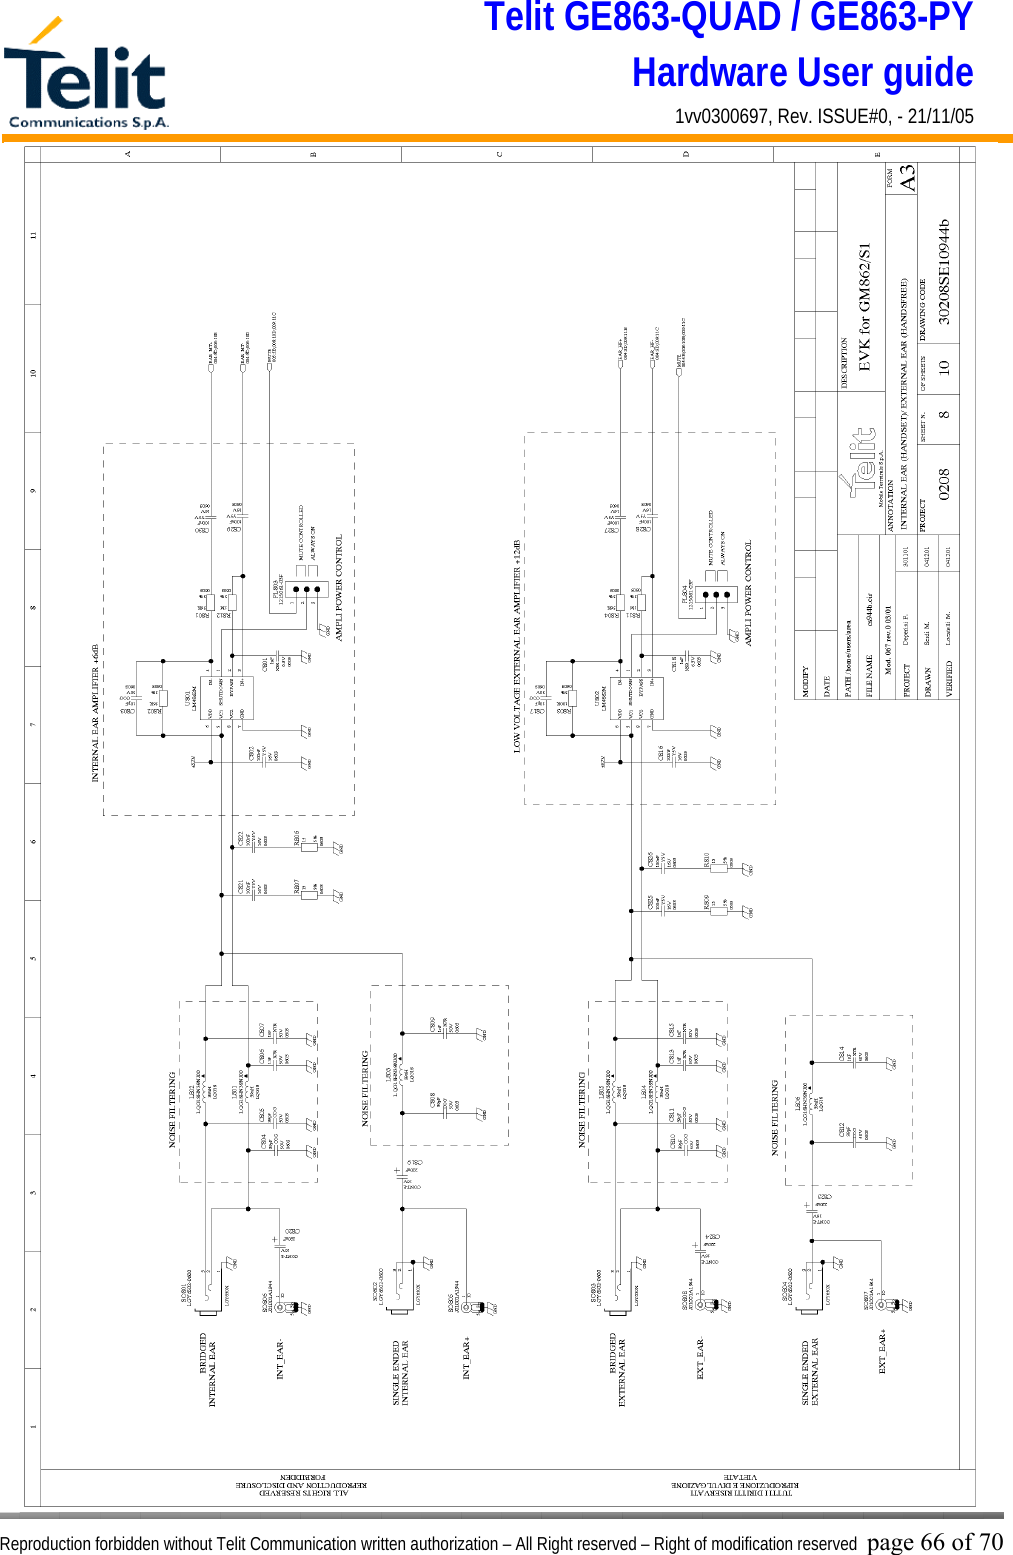 Telit GE863-QUAD / GE863-PY Hardware User guide 1vv0300697, Rev. ISSUE#0, - 21/11/05    Reproduction forbidden without Telit Communication written authorization – All Right reserved – Right of modification reserved page 66 of 70 